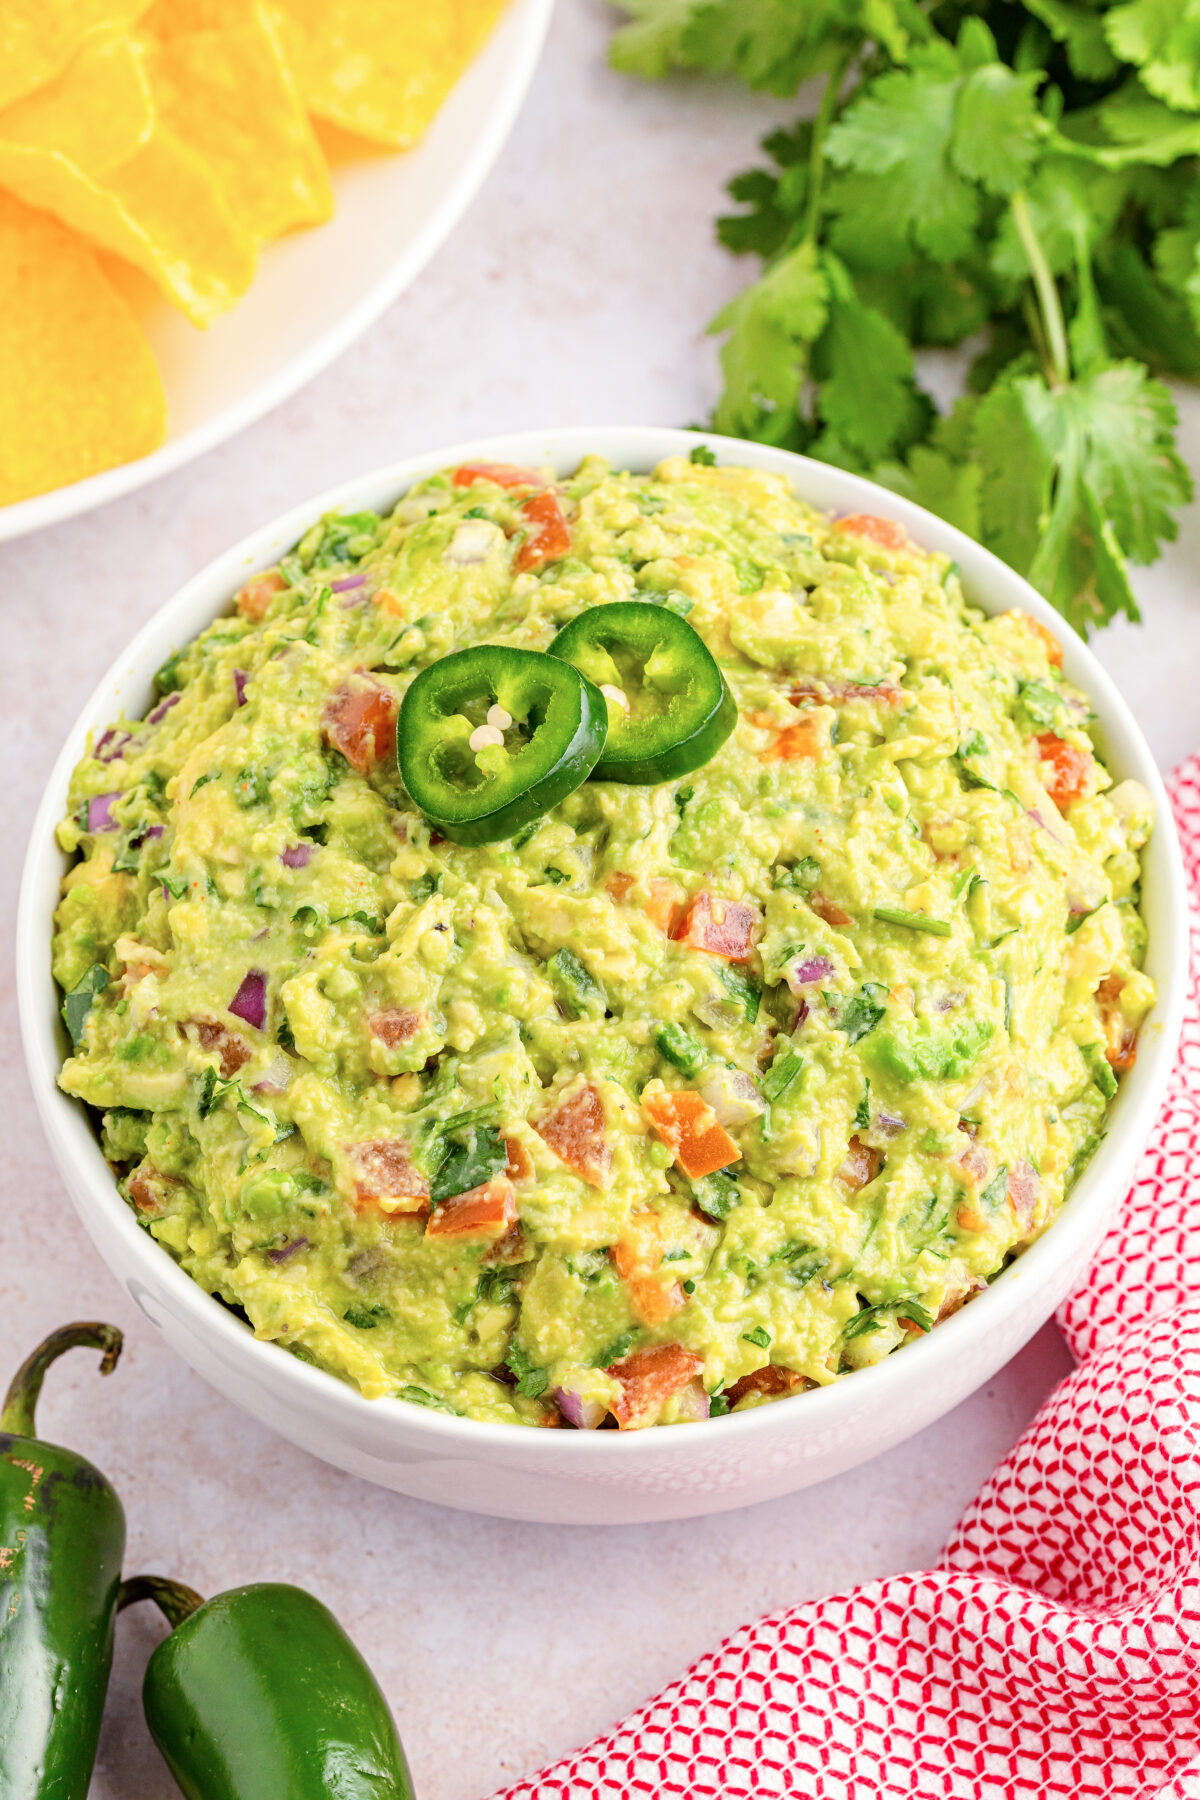 Make your next party or taco Tuesday extra special with this delicious and easy chunky guacamole recipe made with fresh ingredients!